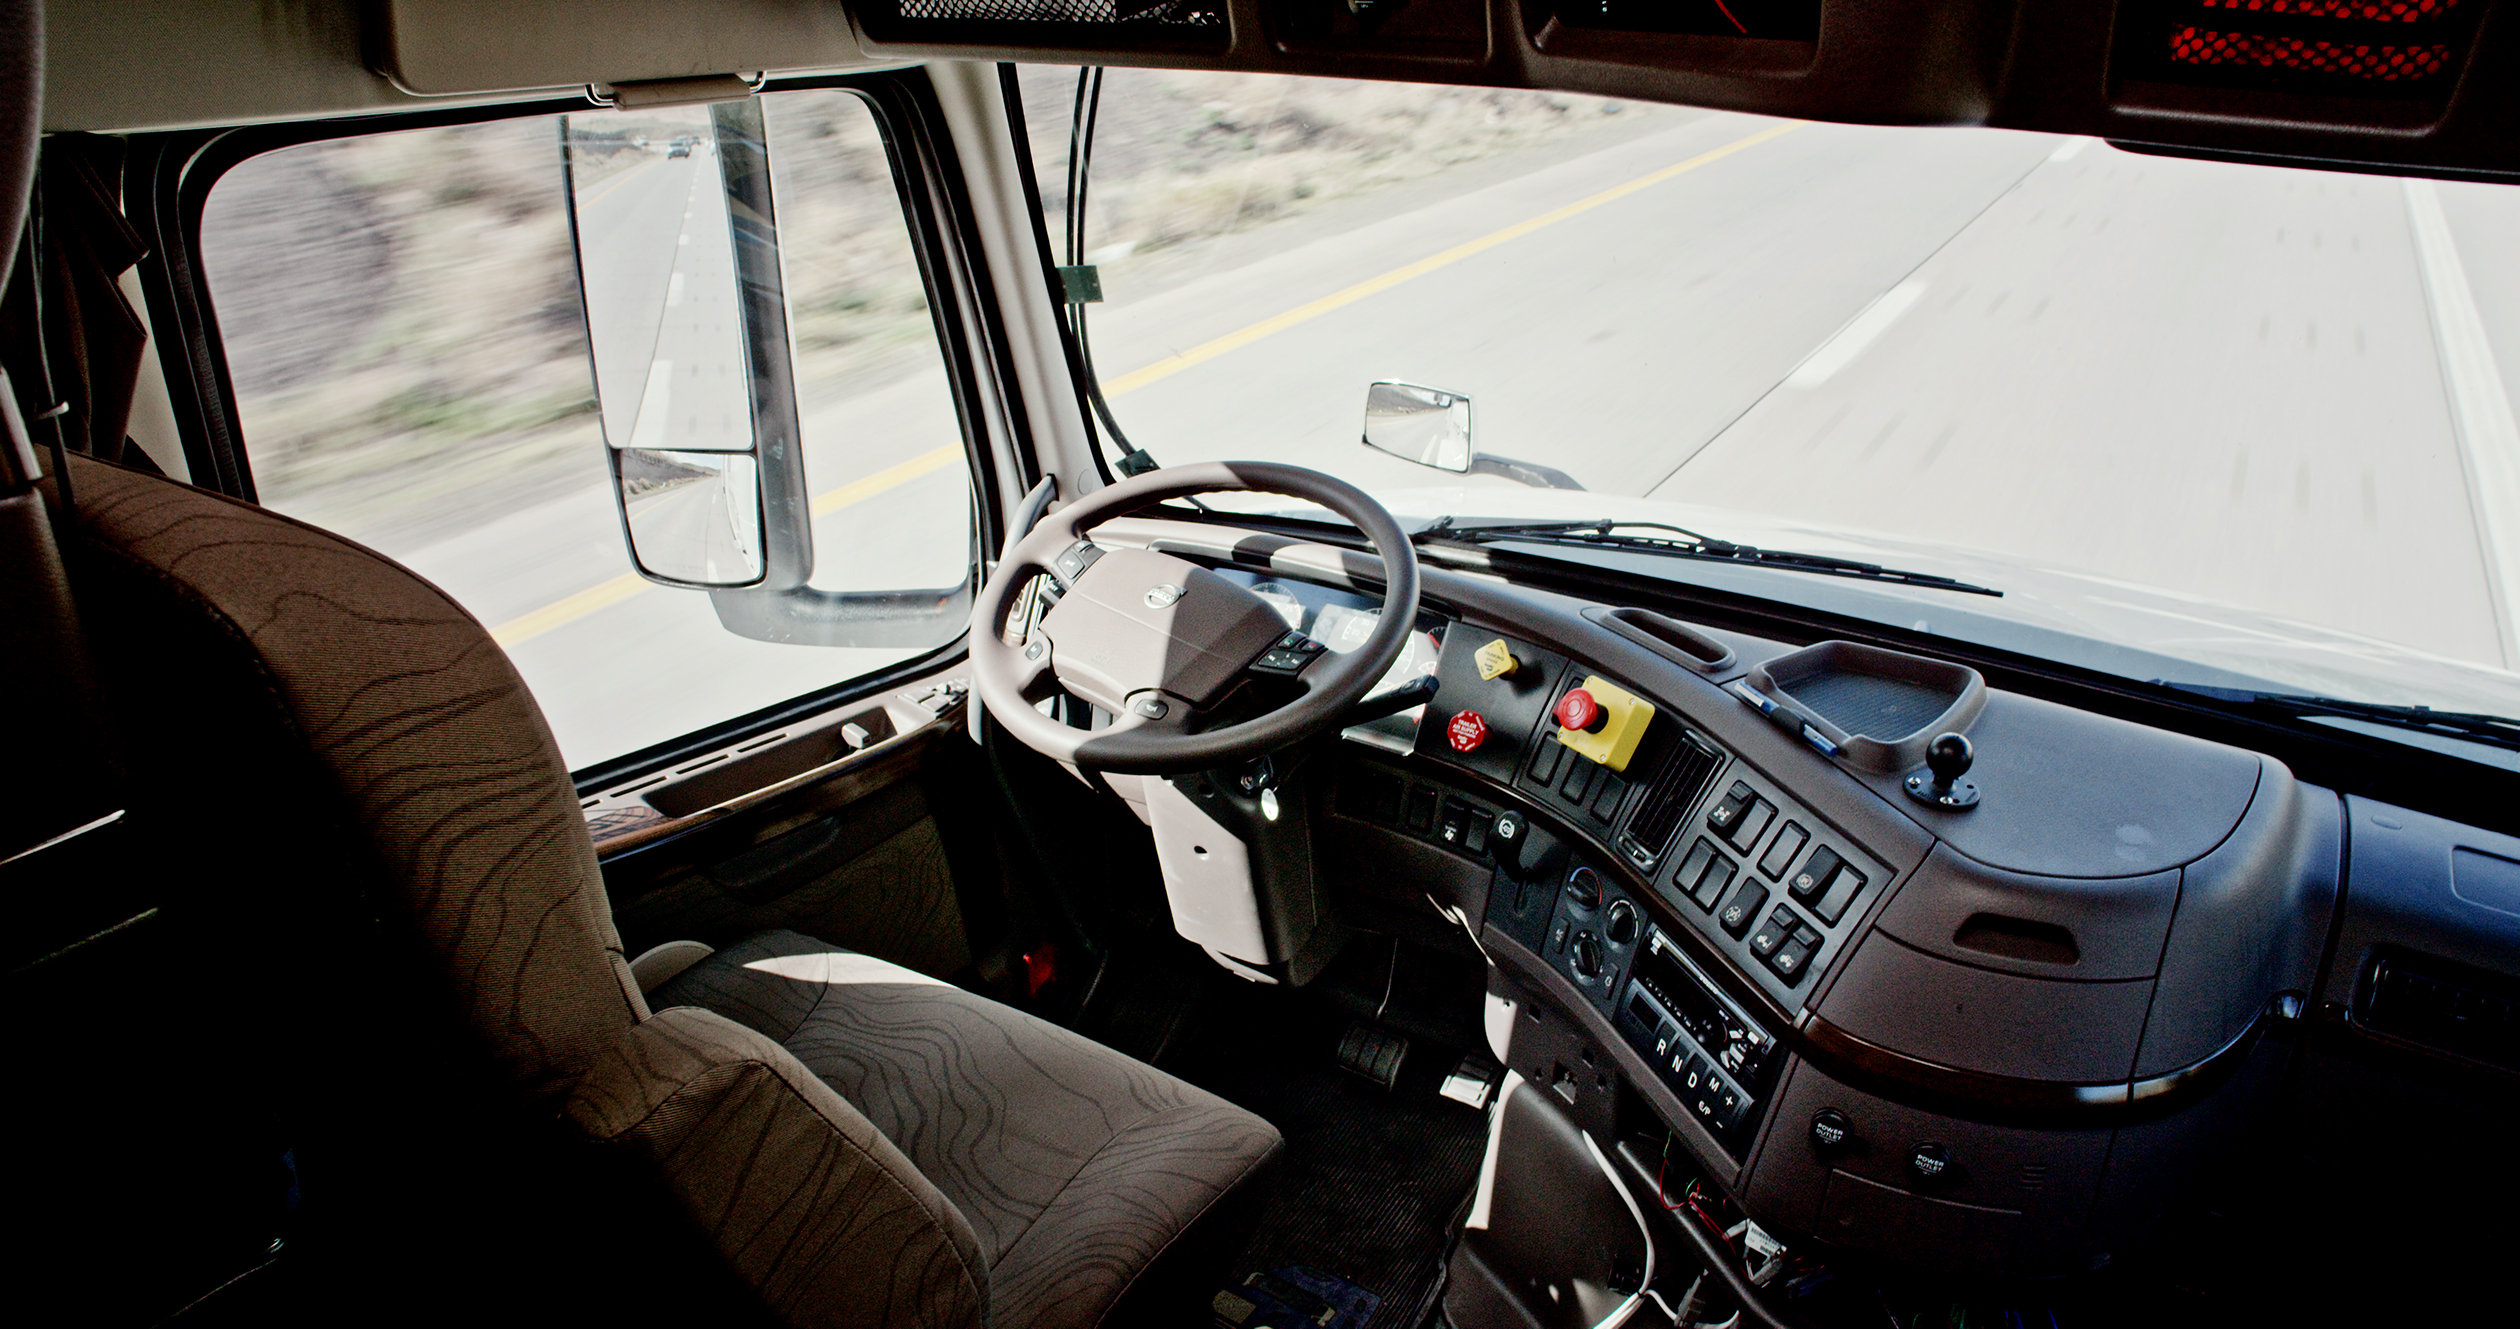 Sociologist Steve Viscelli studies the trucking industry. A report publishing soon looks at what effect driverless trucks will have on the industry as a whole.